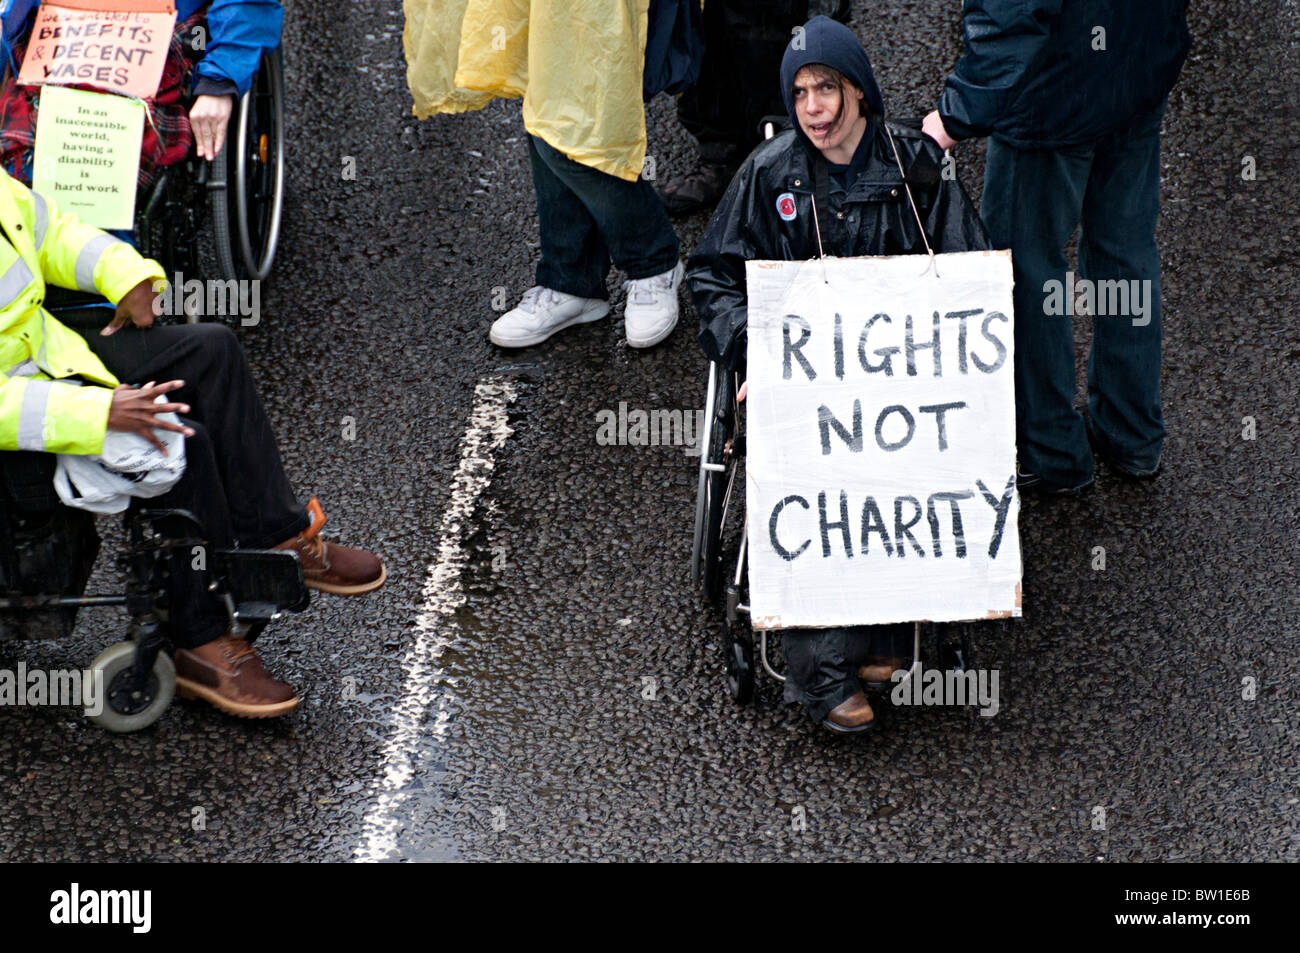 Workers march against Coalition cuts Birmingham at the time of conservative conference against austerity cuts Stock Photo